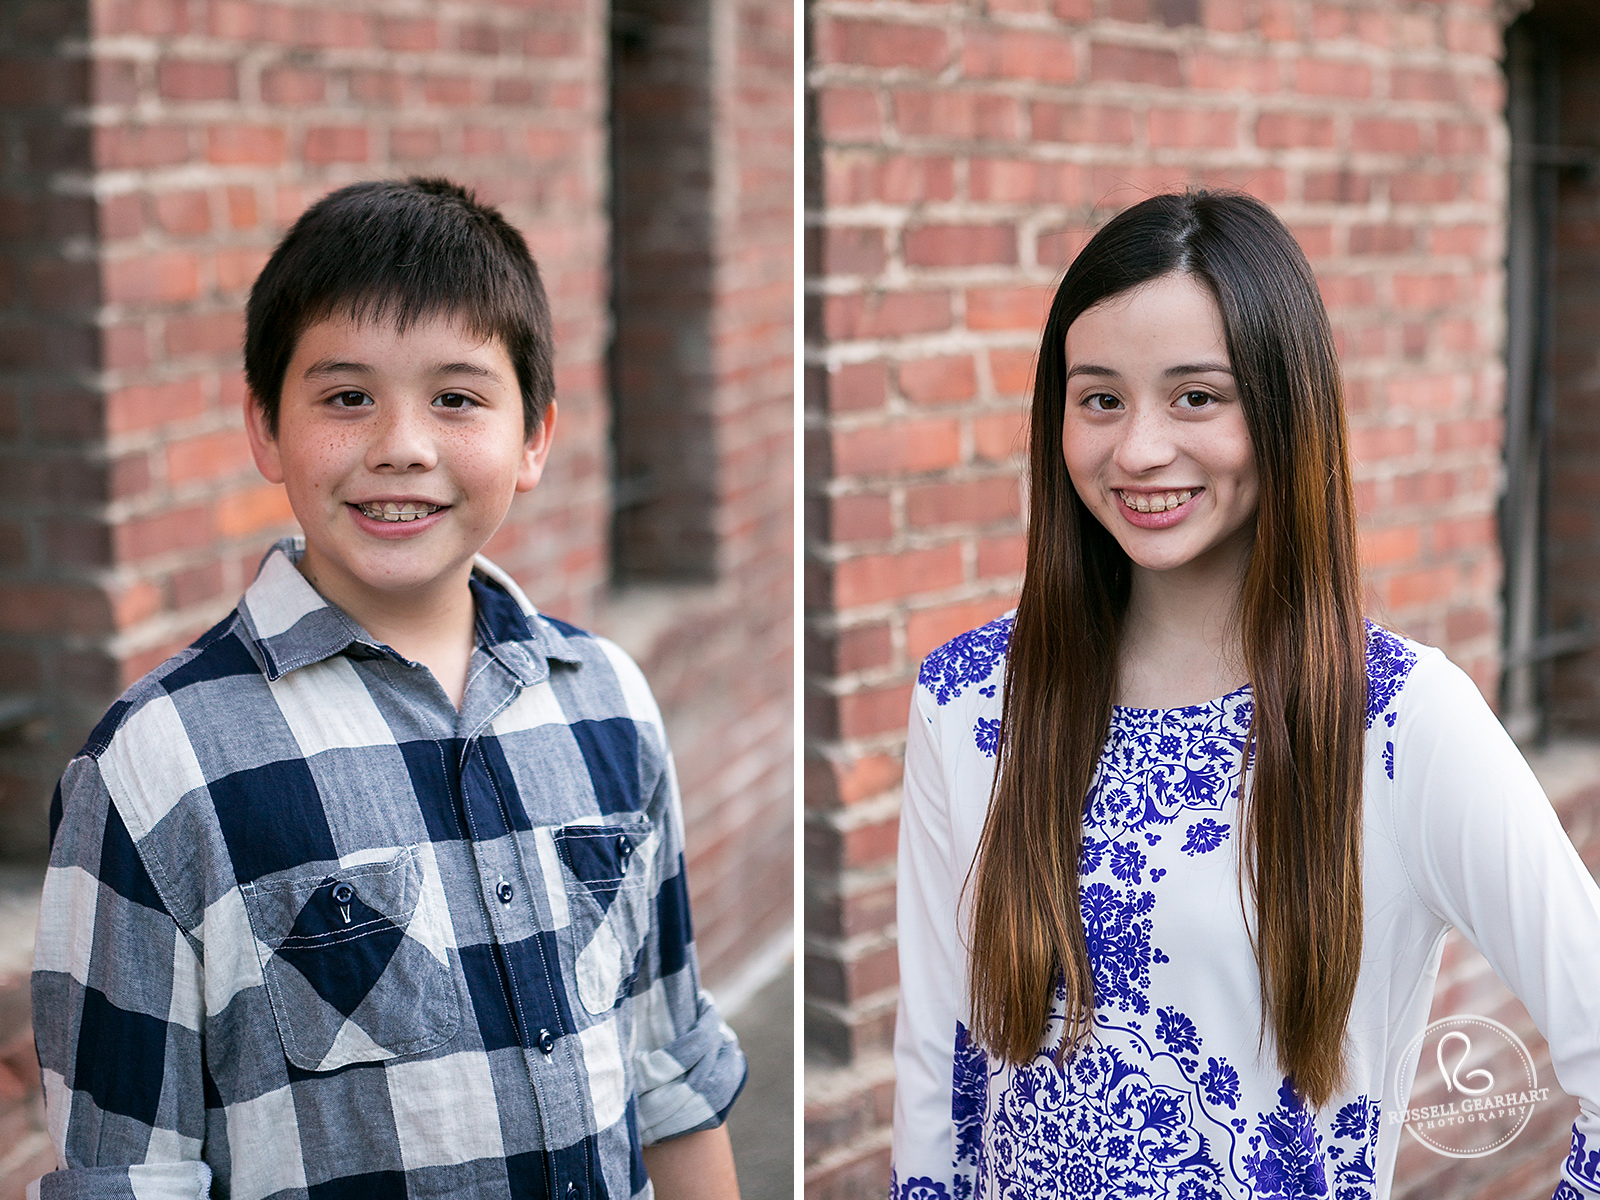 Old Town Pasadena Family Portraits – Russell Gearhart Photography – www.gearhartphoto.com